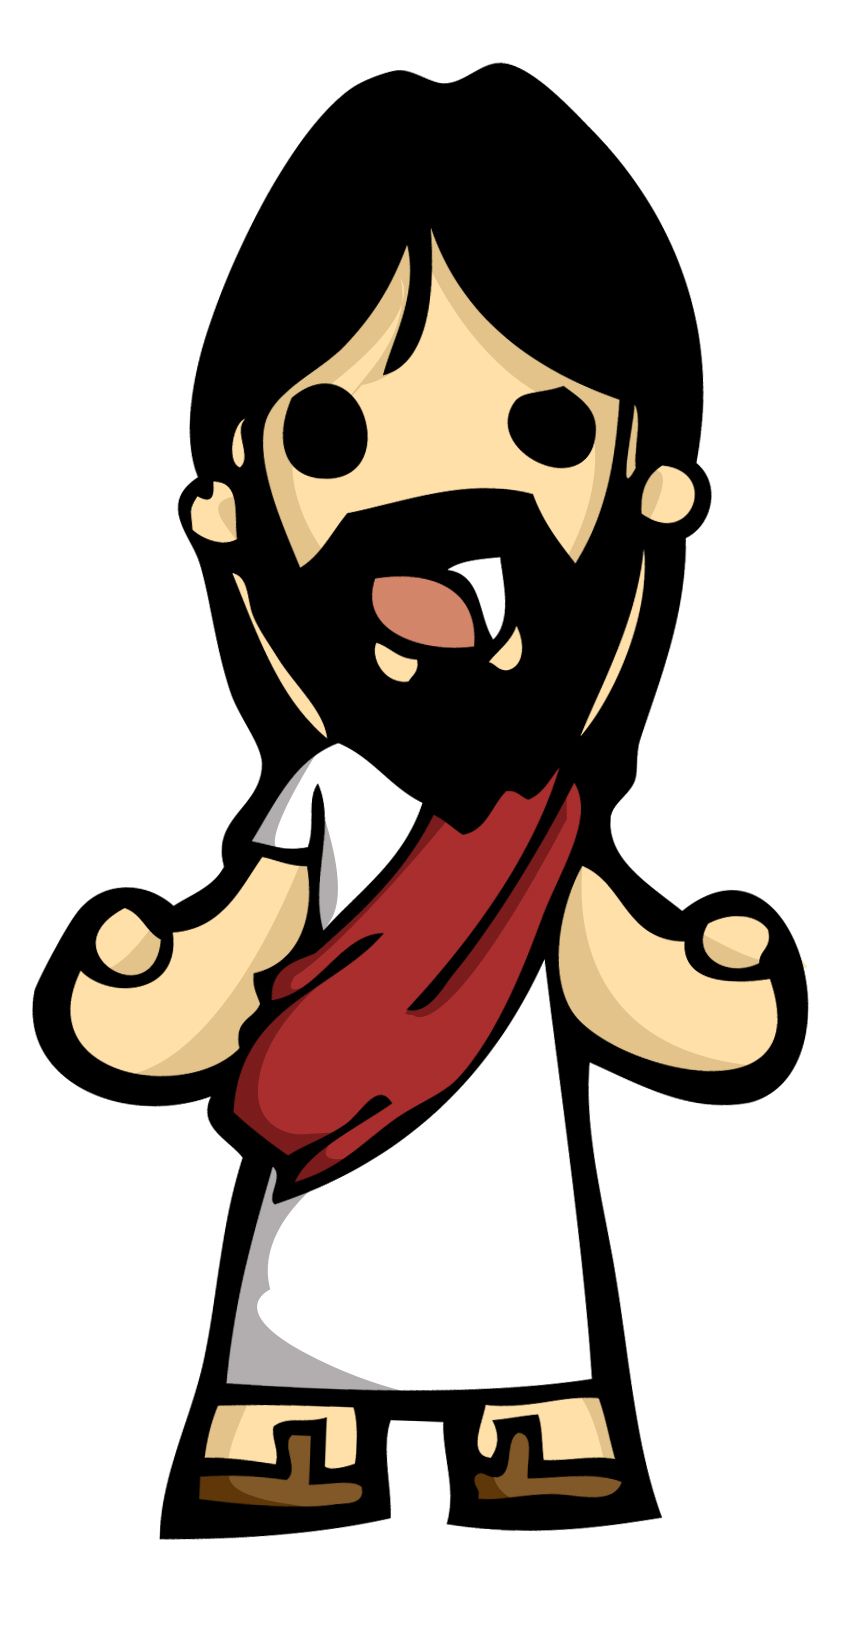 Free Jesus Cartoon Image, Download Free Clip Art, Free Clip Art on Clipart Library